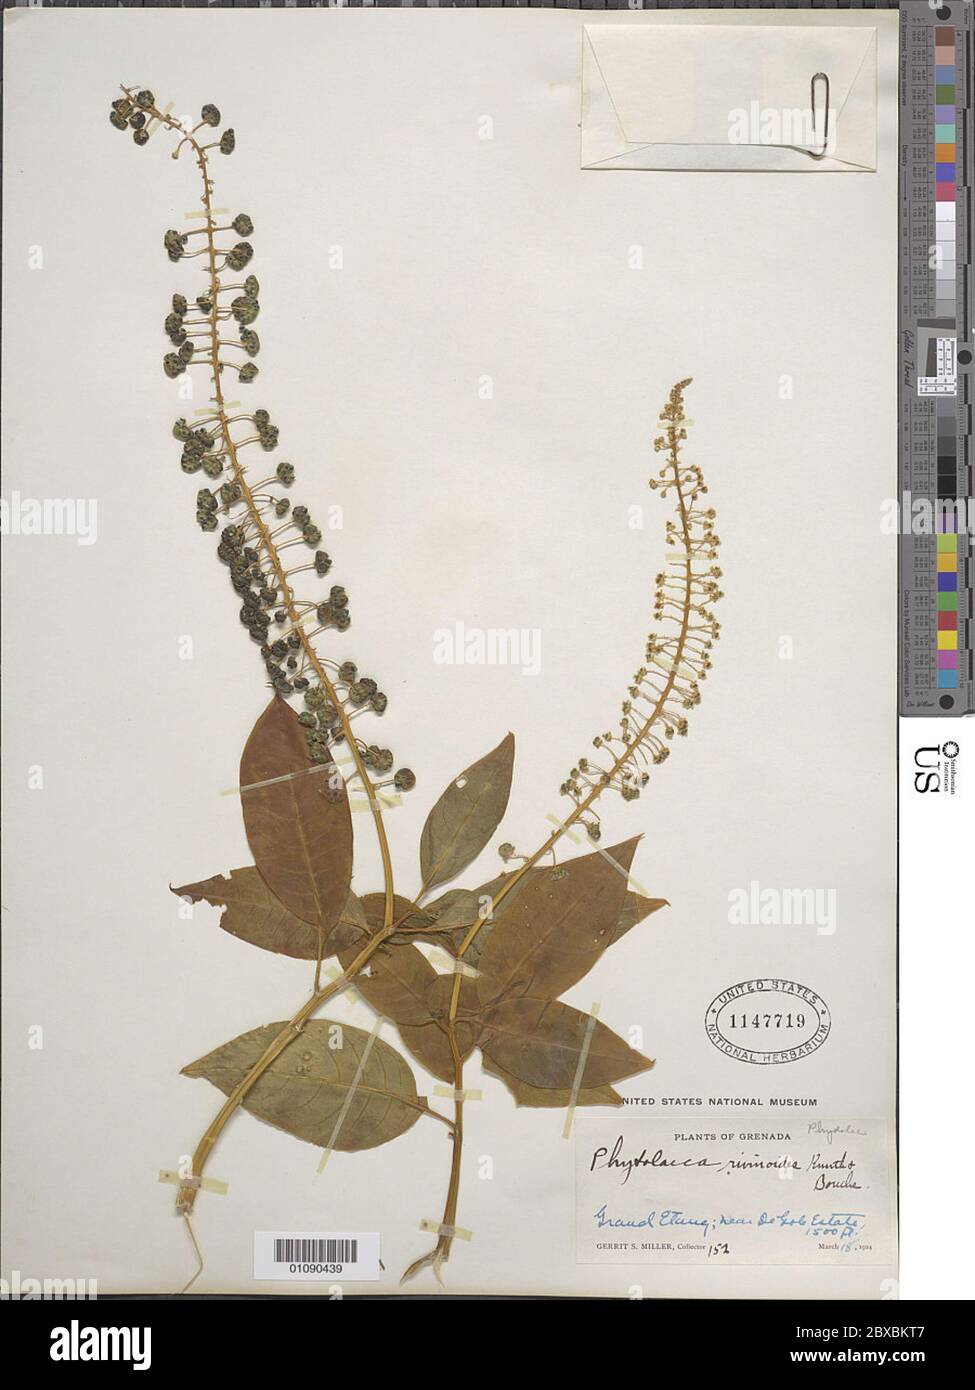 Phytolacca rivinoides Kunth CD Bouch Phytolacca rivinoides Kunth CD Bouch. Stock Photo